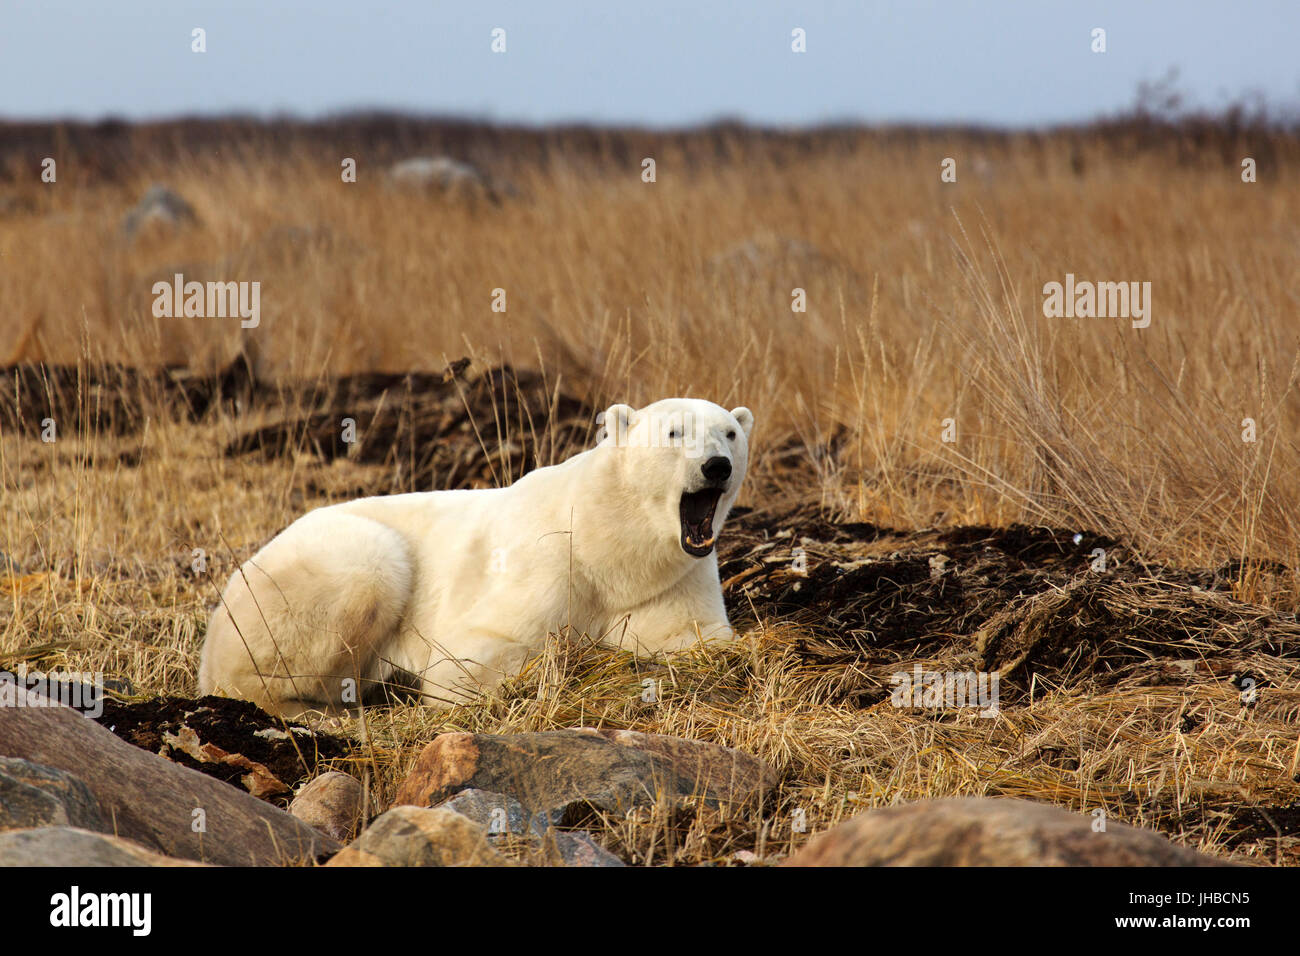 Yawning Polar bear (Ursus maritimus) in Manitoba, Canada. Polar bears are carniverous and live in the northern hemisphere. Stock Photo